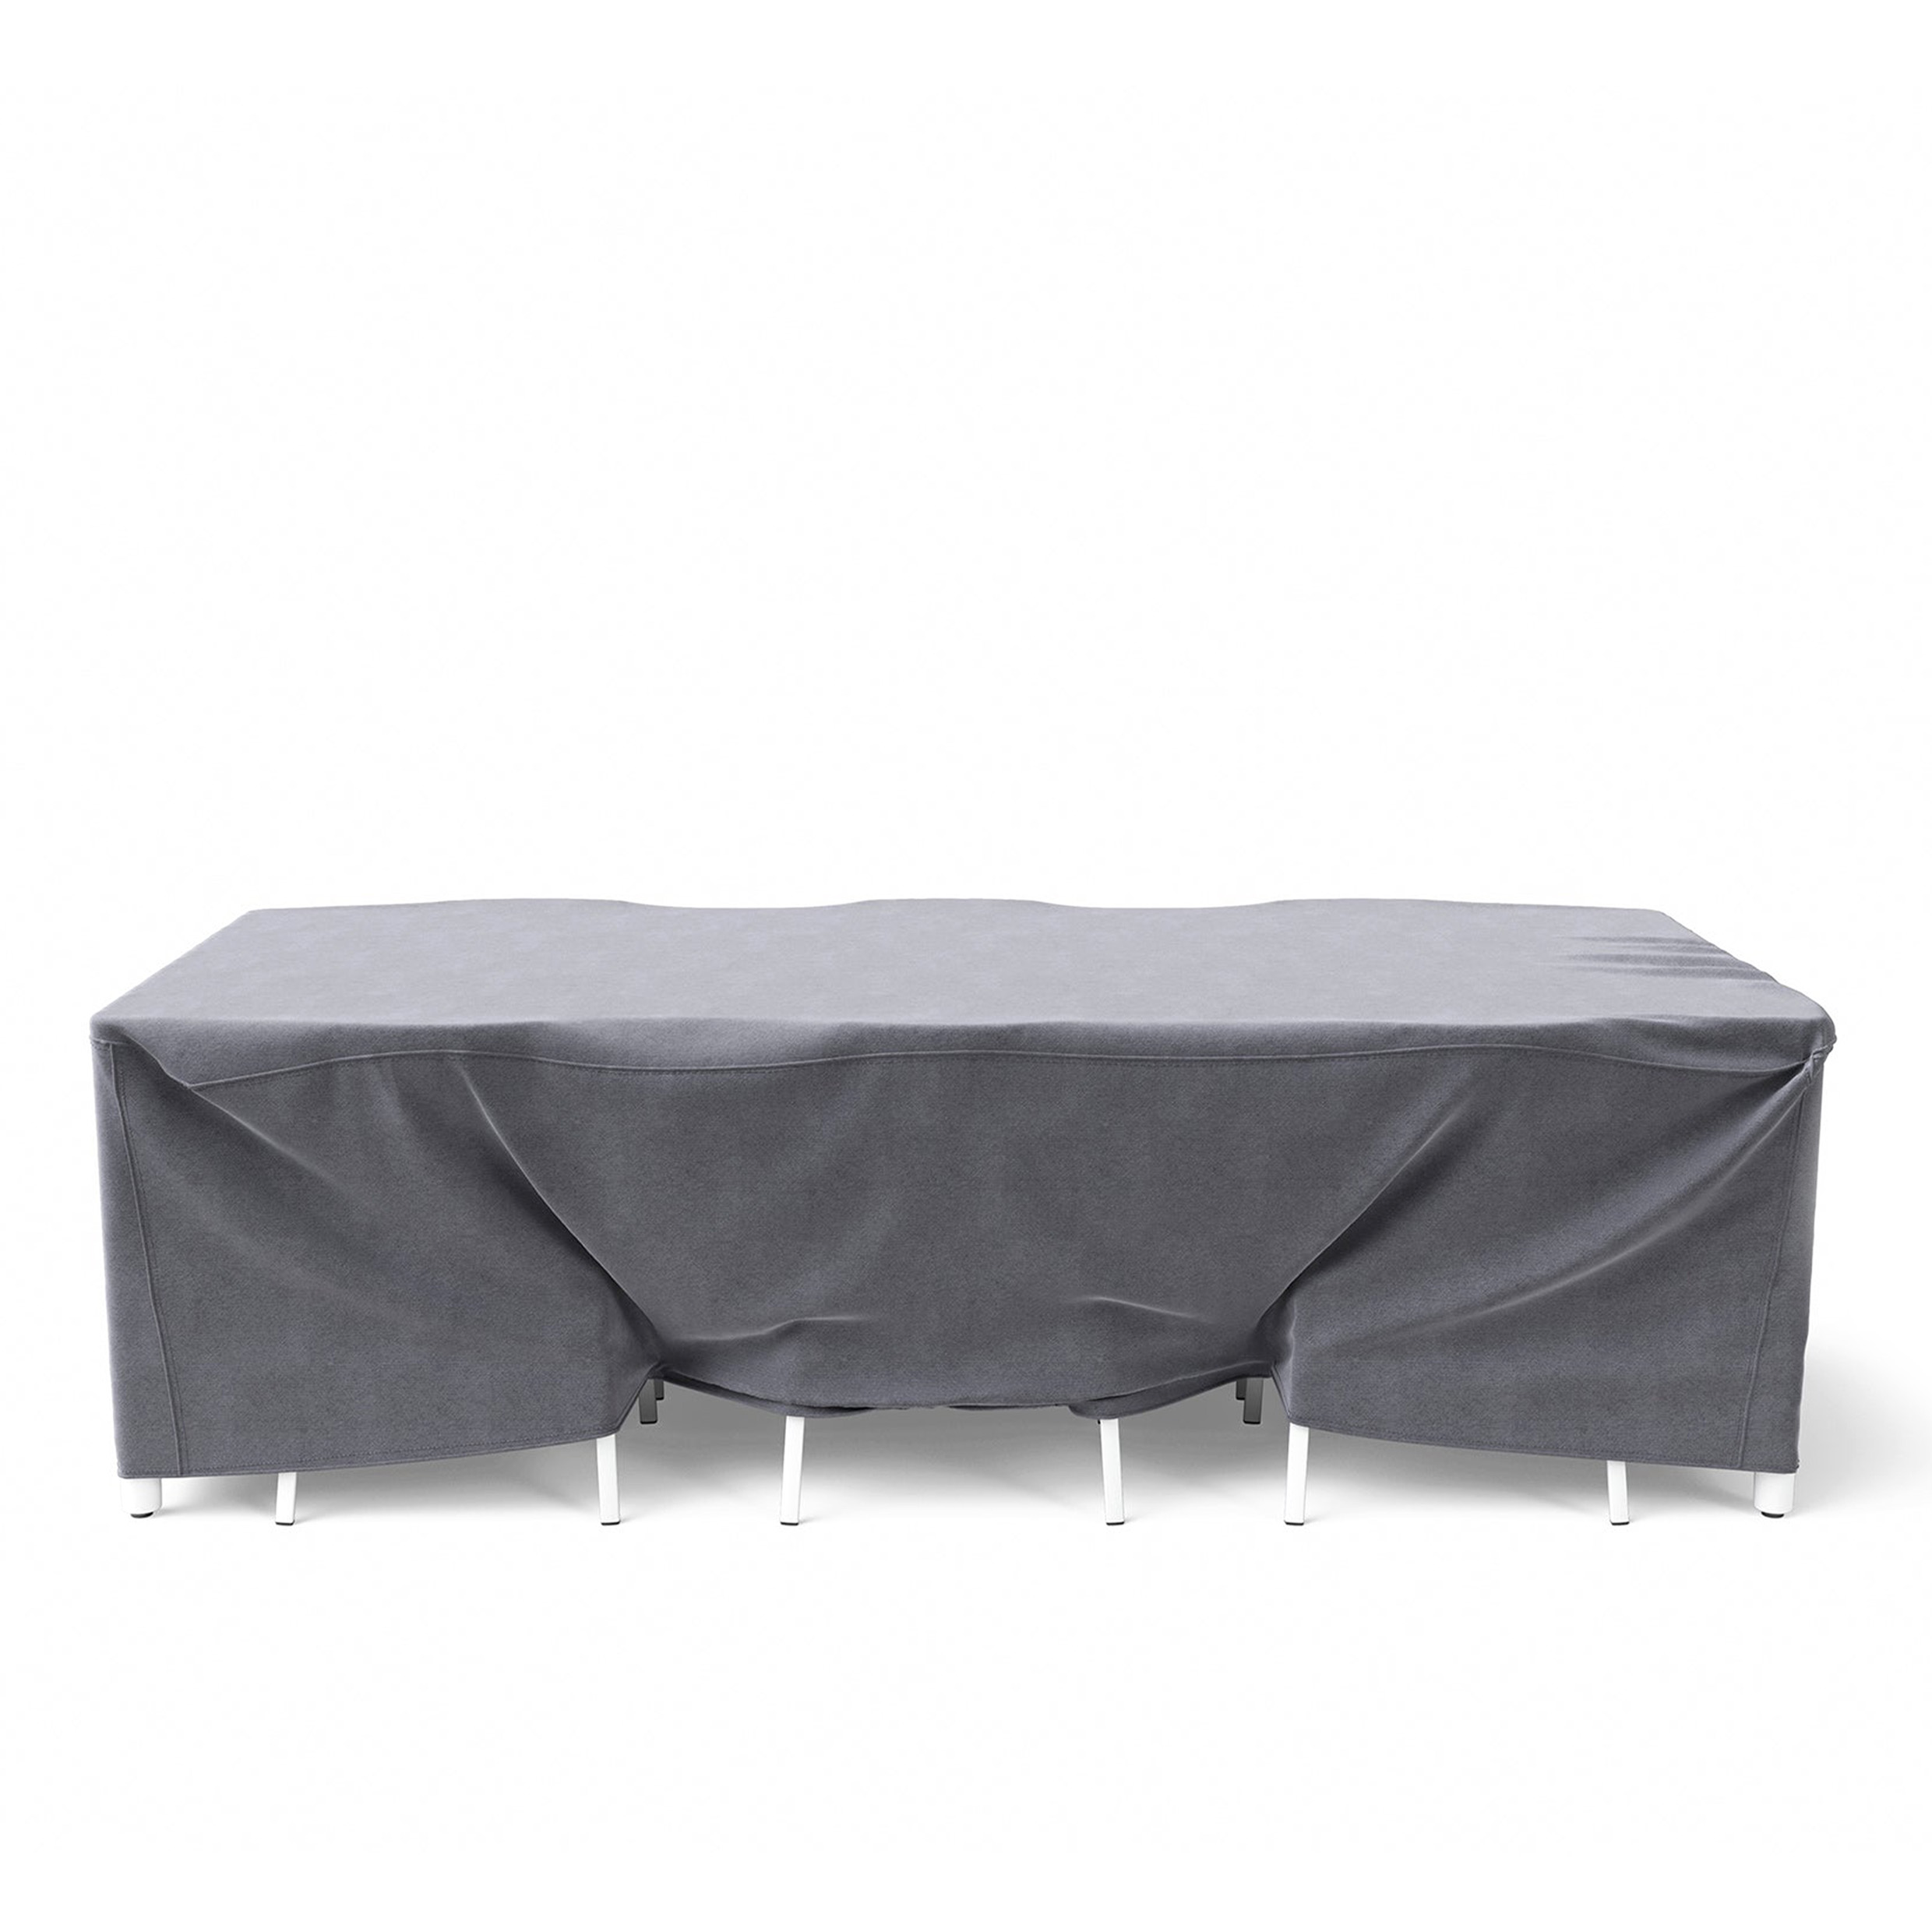 VIPP 719 // OPEN-AIR TABLE - COVER